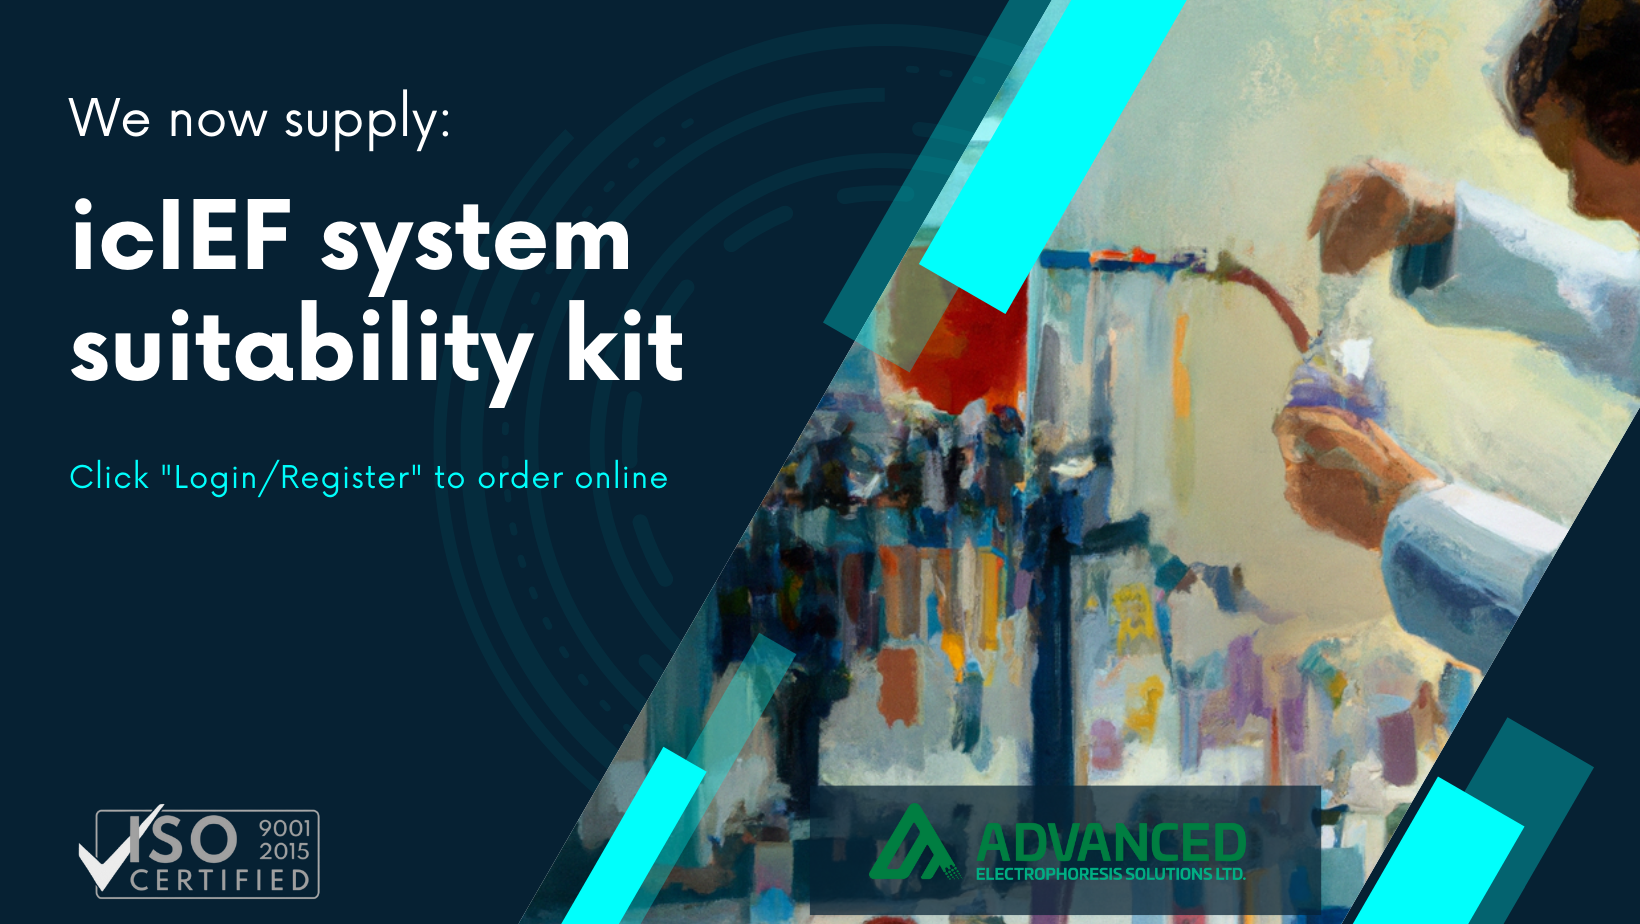 icIEF/CEInfinite System Suitability Kit